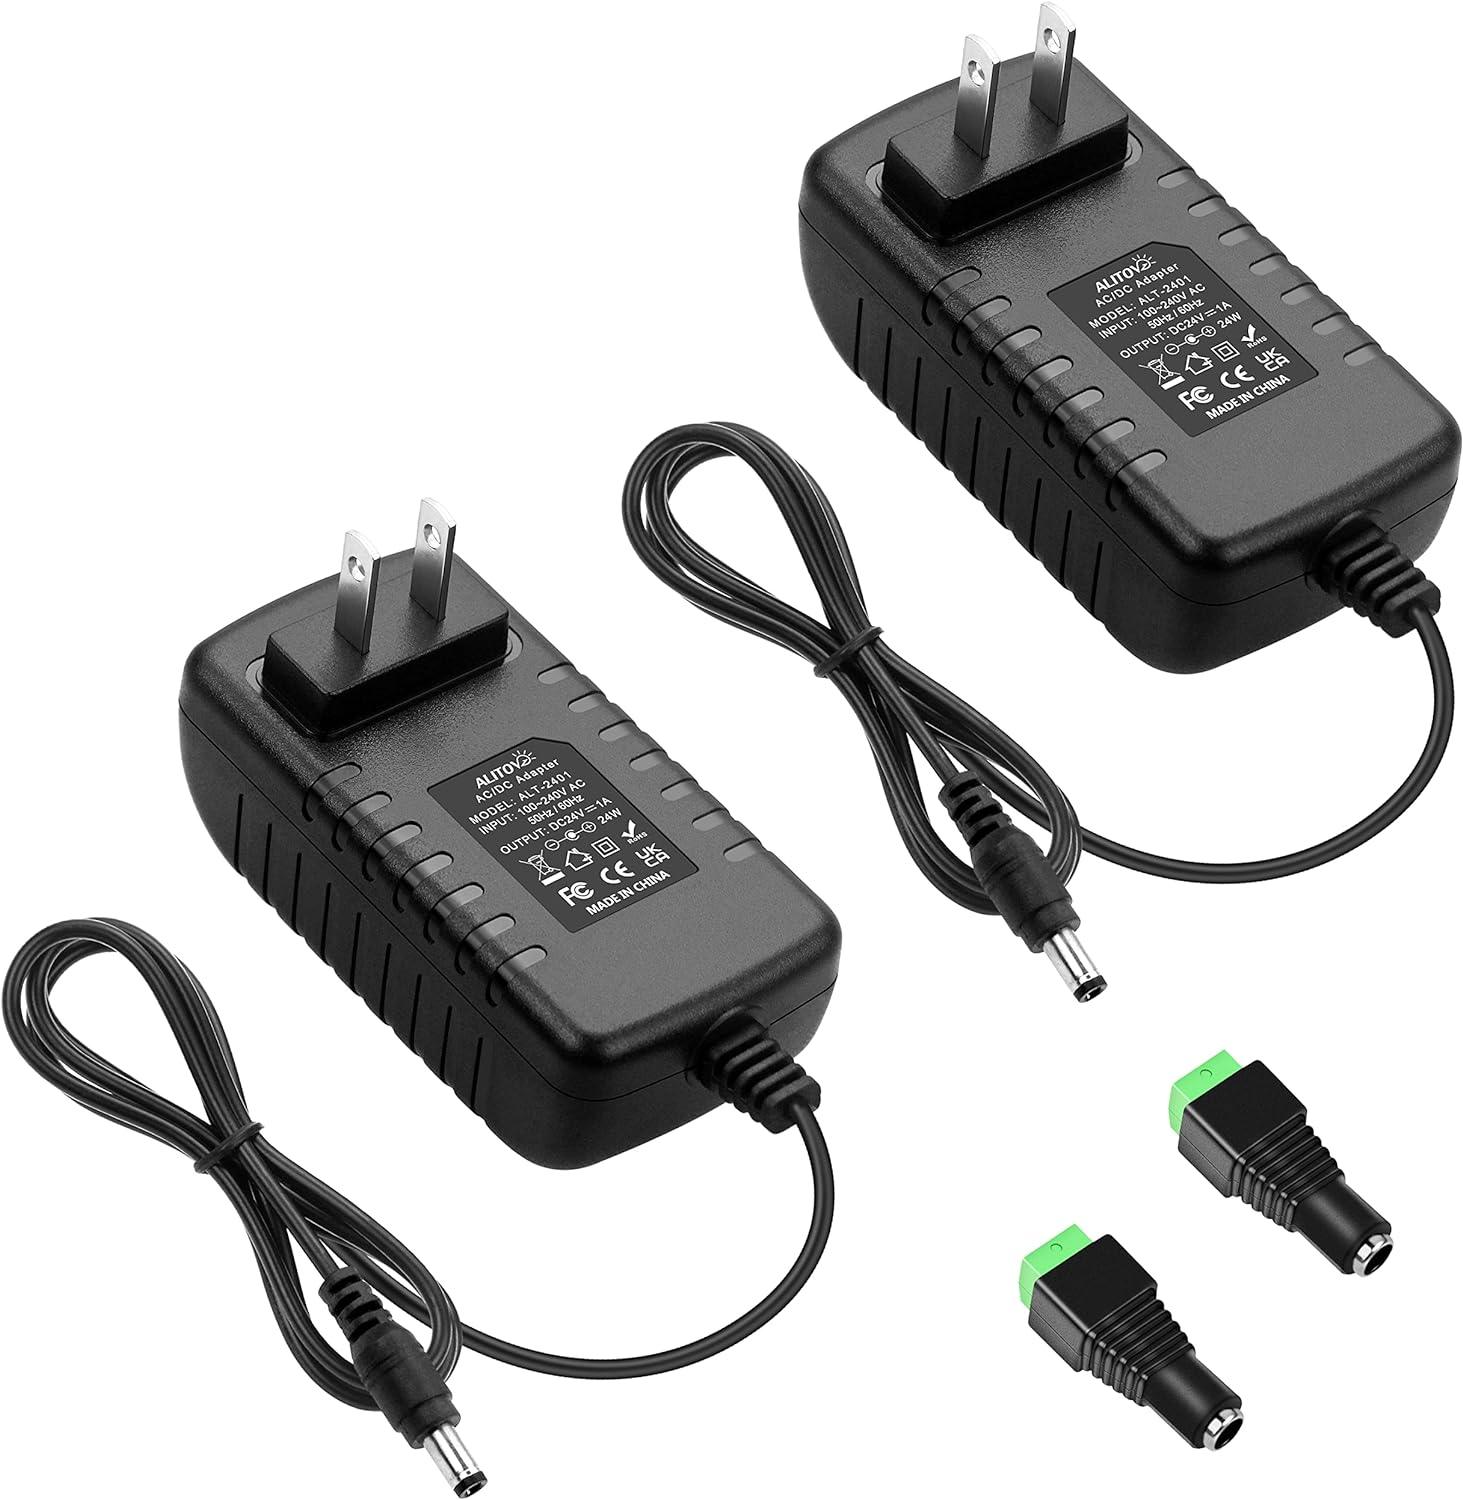 ALITOVE 24V 1A Power Adapter - Ideal for LED Strip Lights and Small Devices - ALITOVE-Add Vivid Color to Life